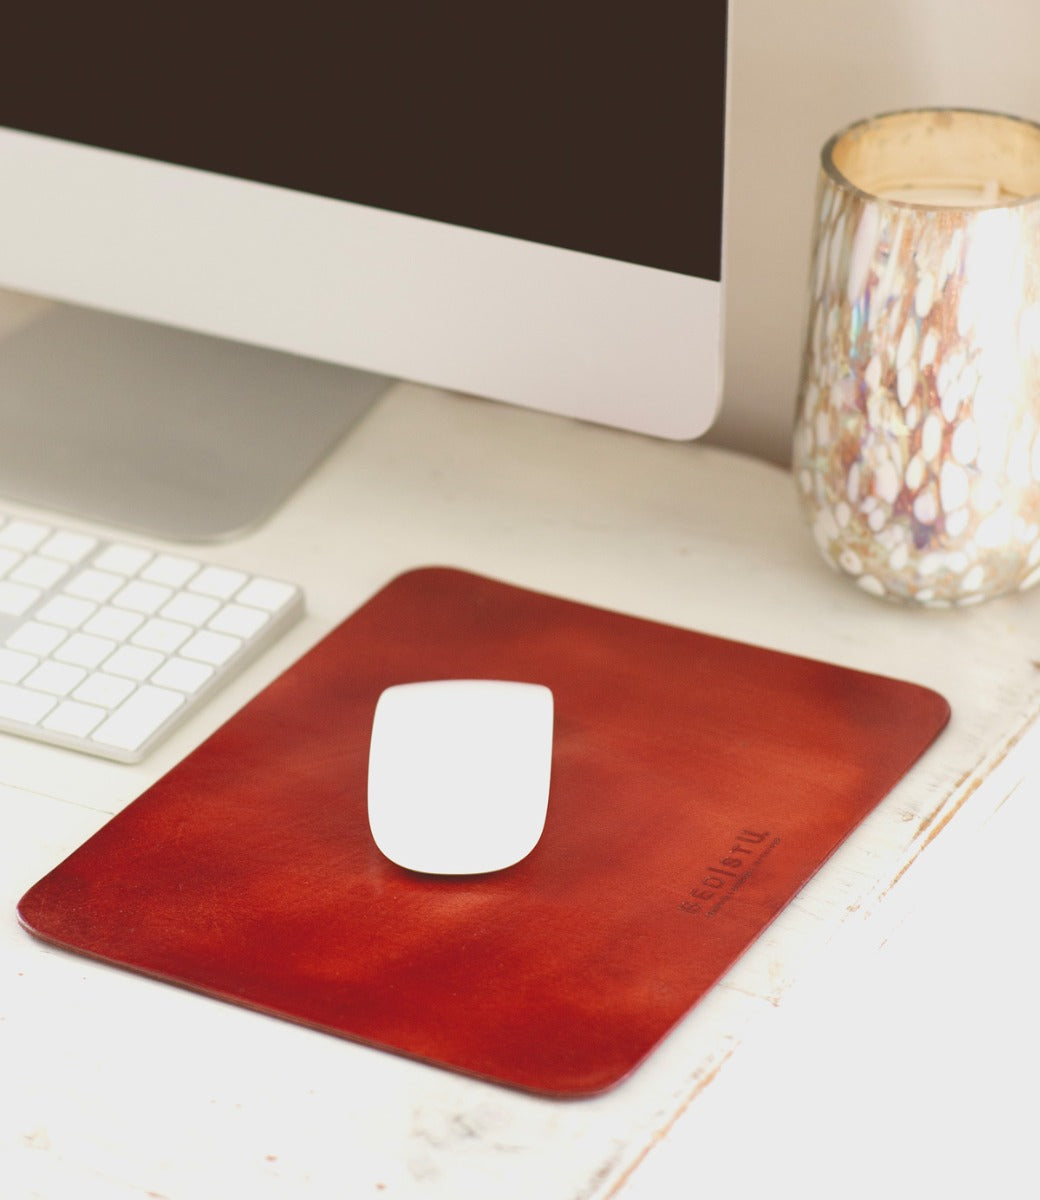 A red leather Launcher mouse pad on a desk next to a computer.